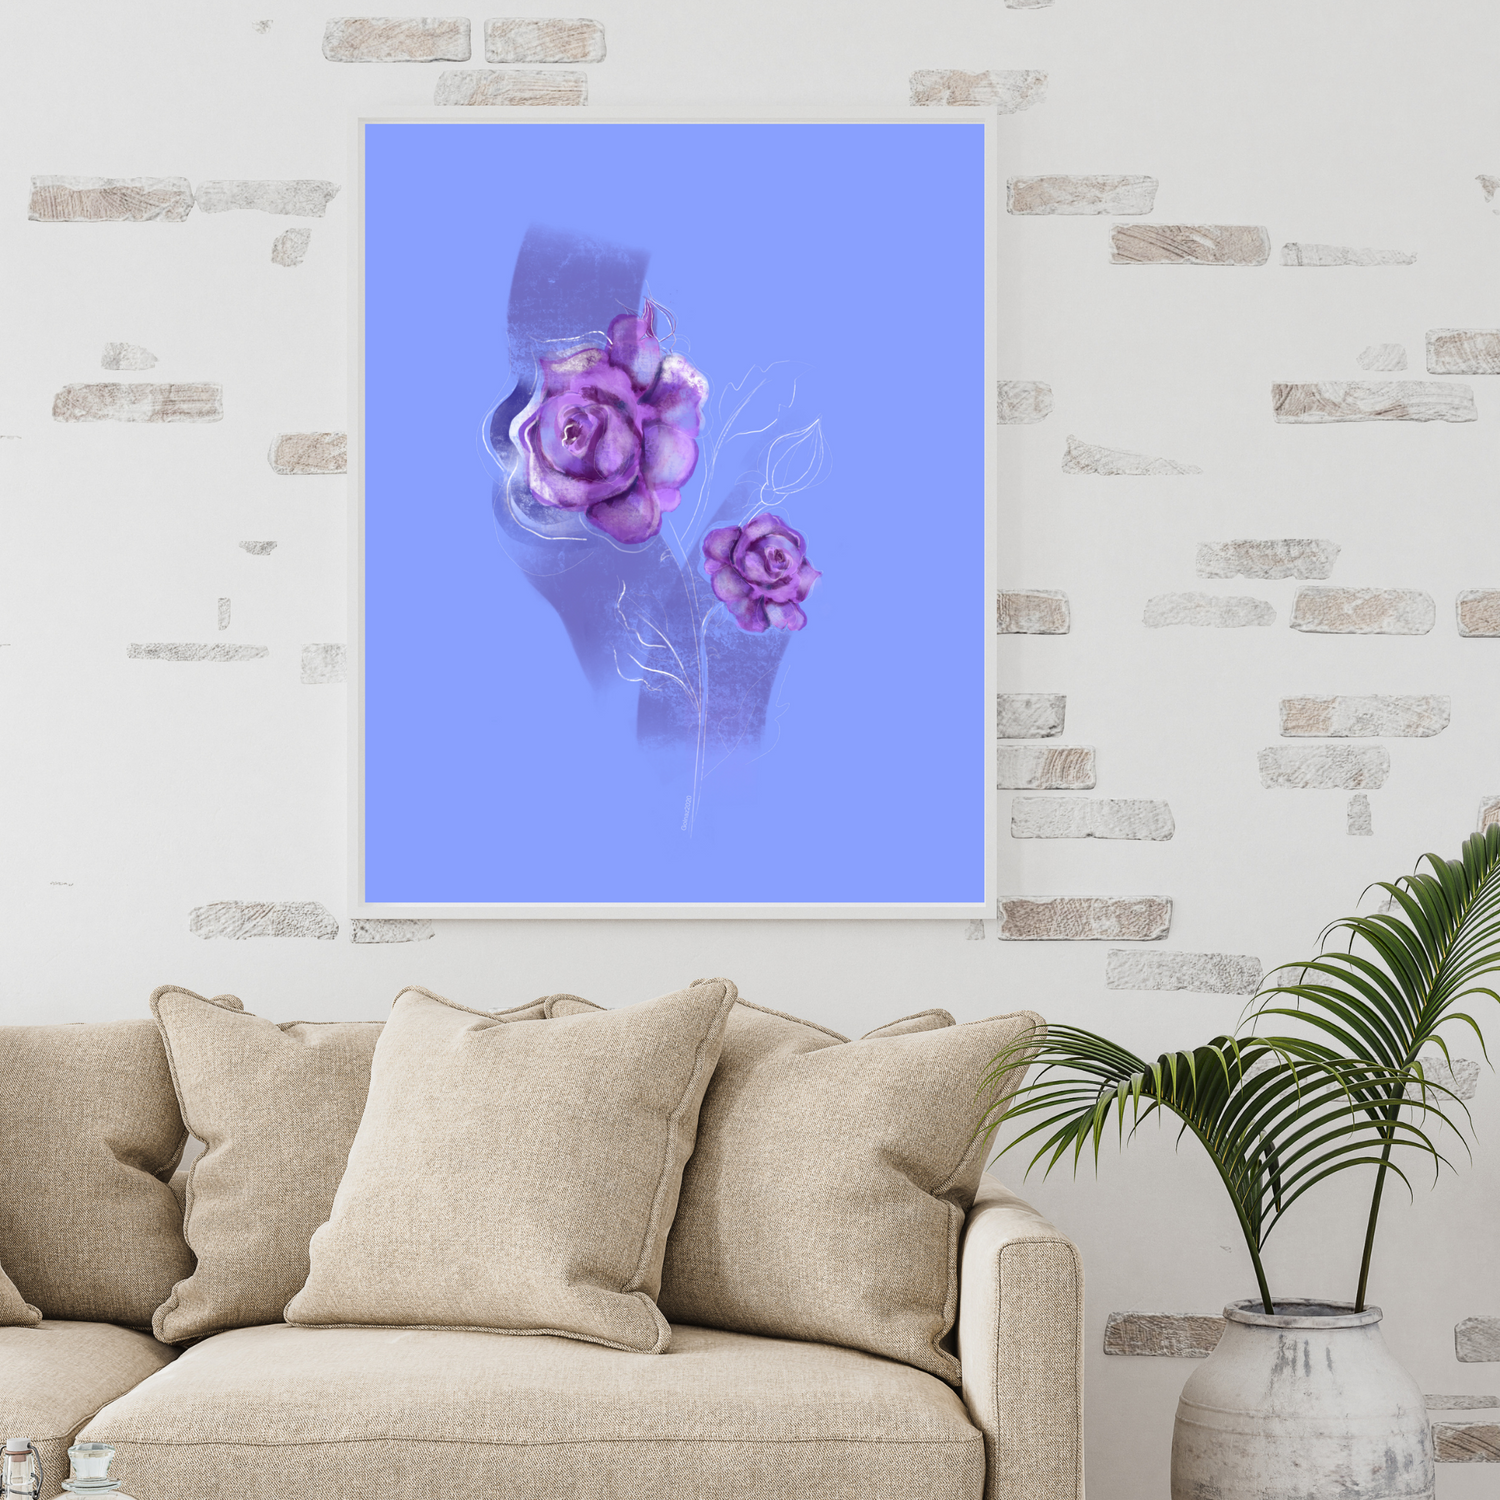 An example of the Rose painting by ArisaTeam in a living room